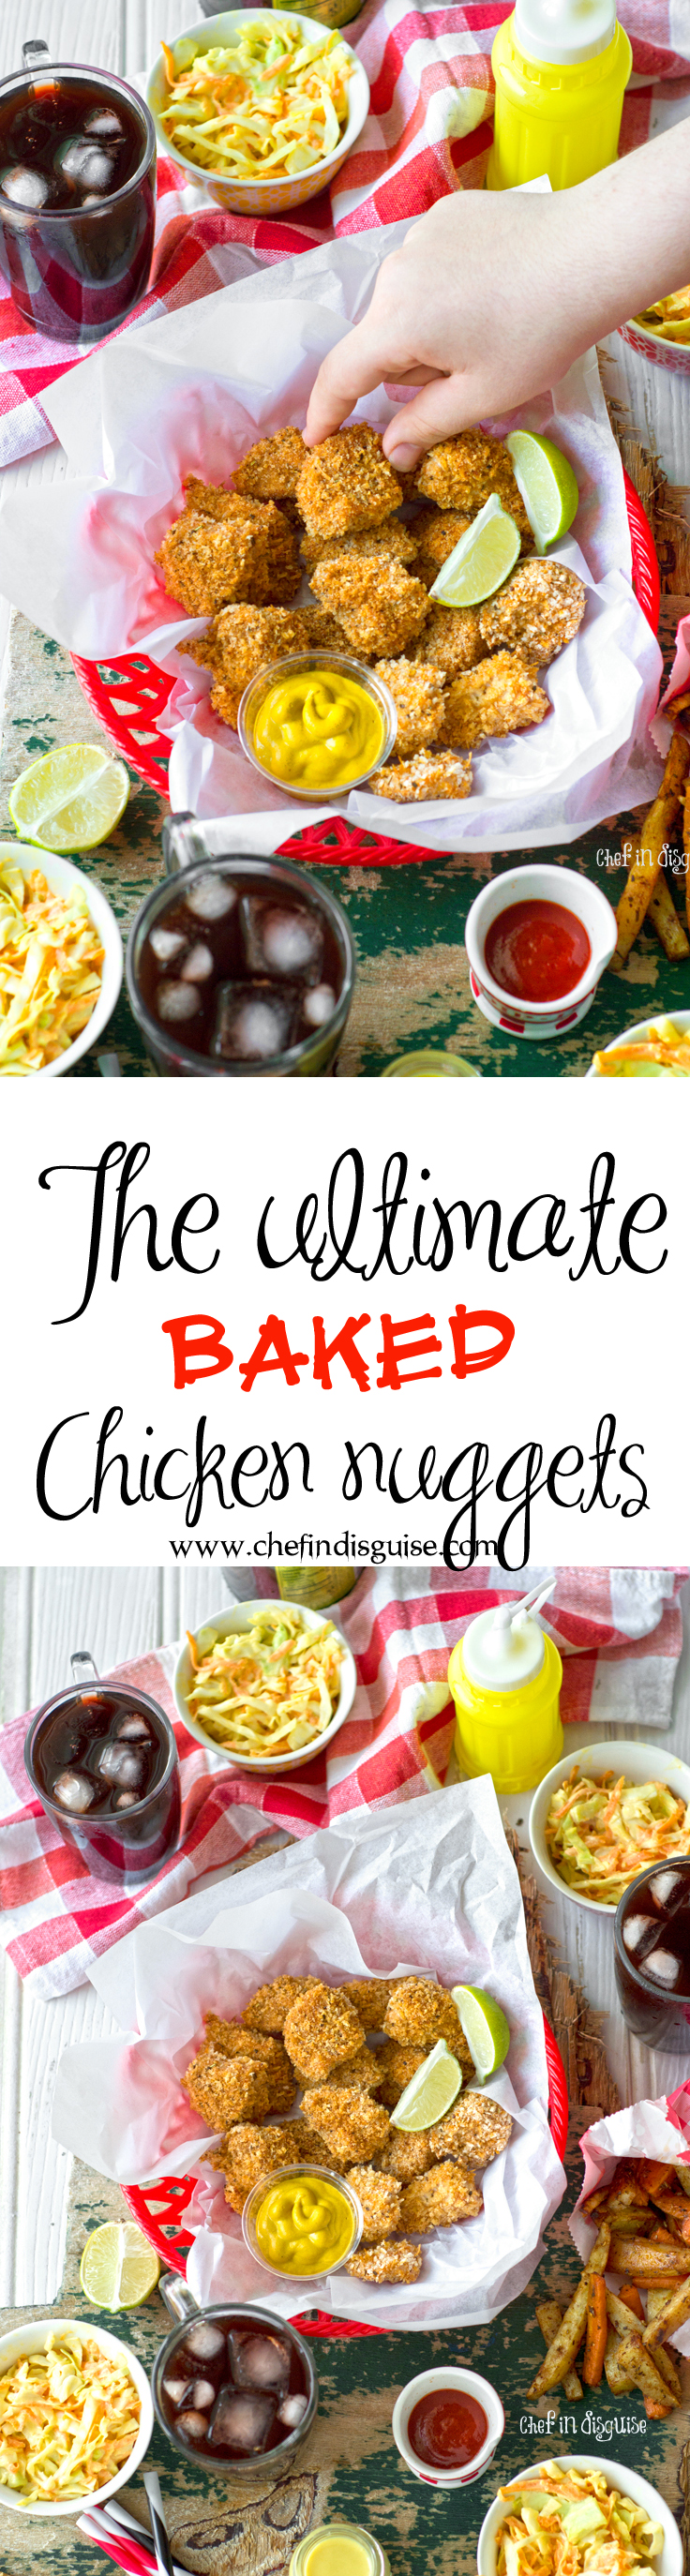 the ultimate baked chicken nuggets recipe